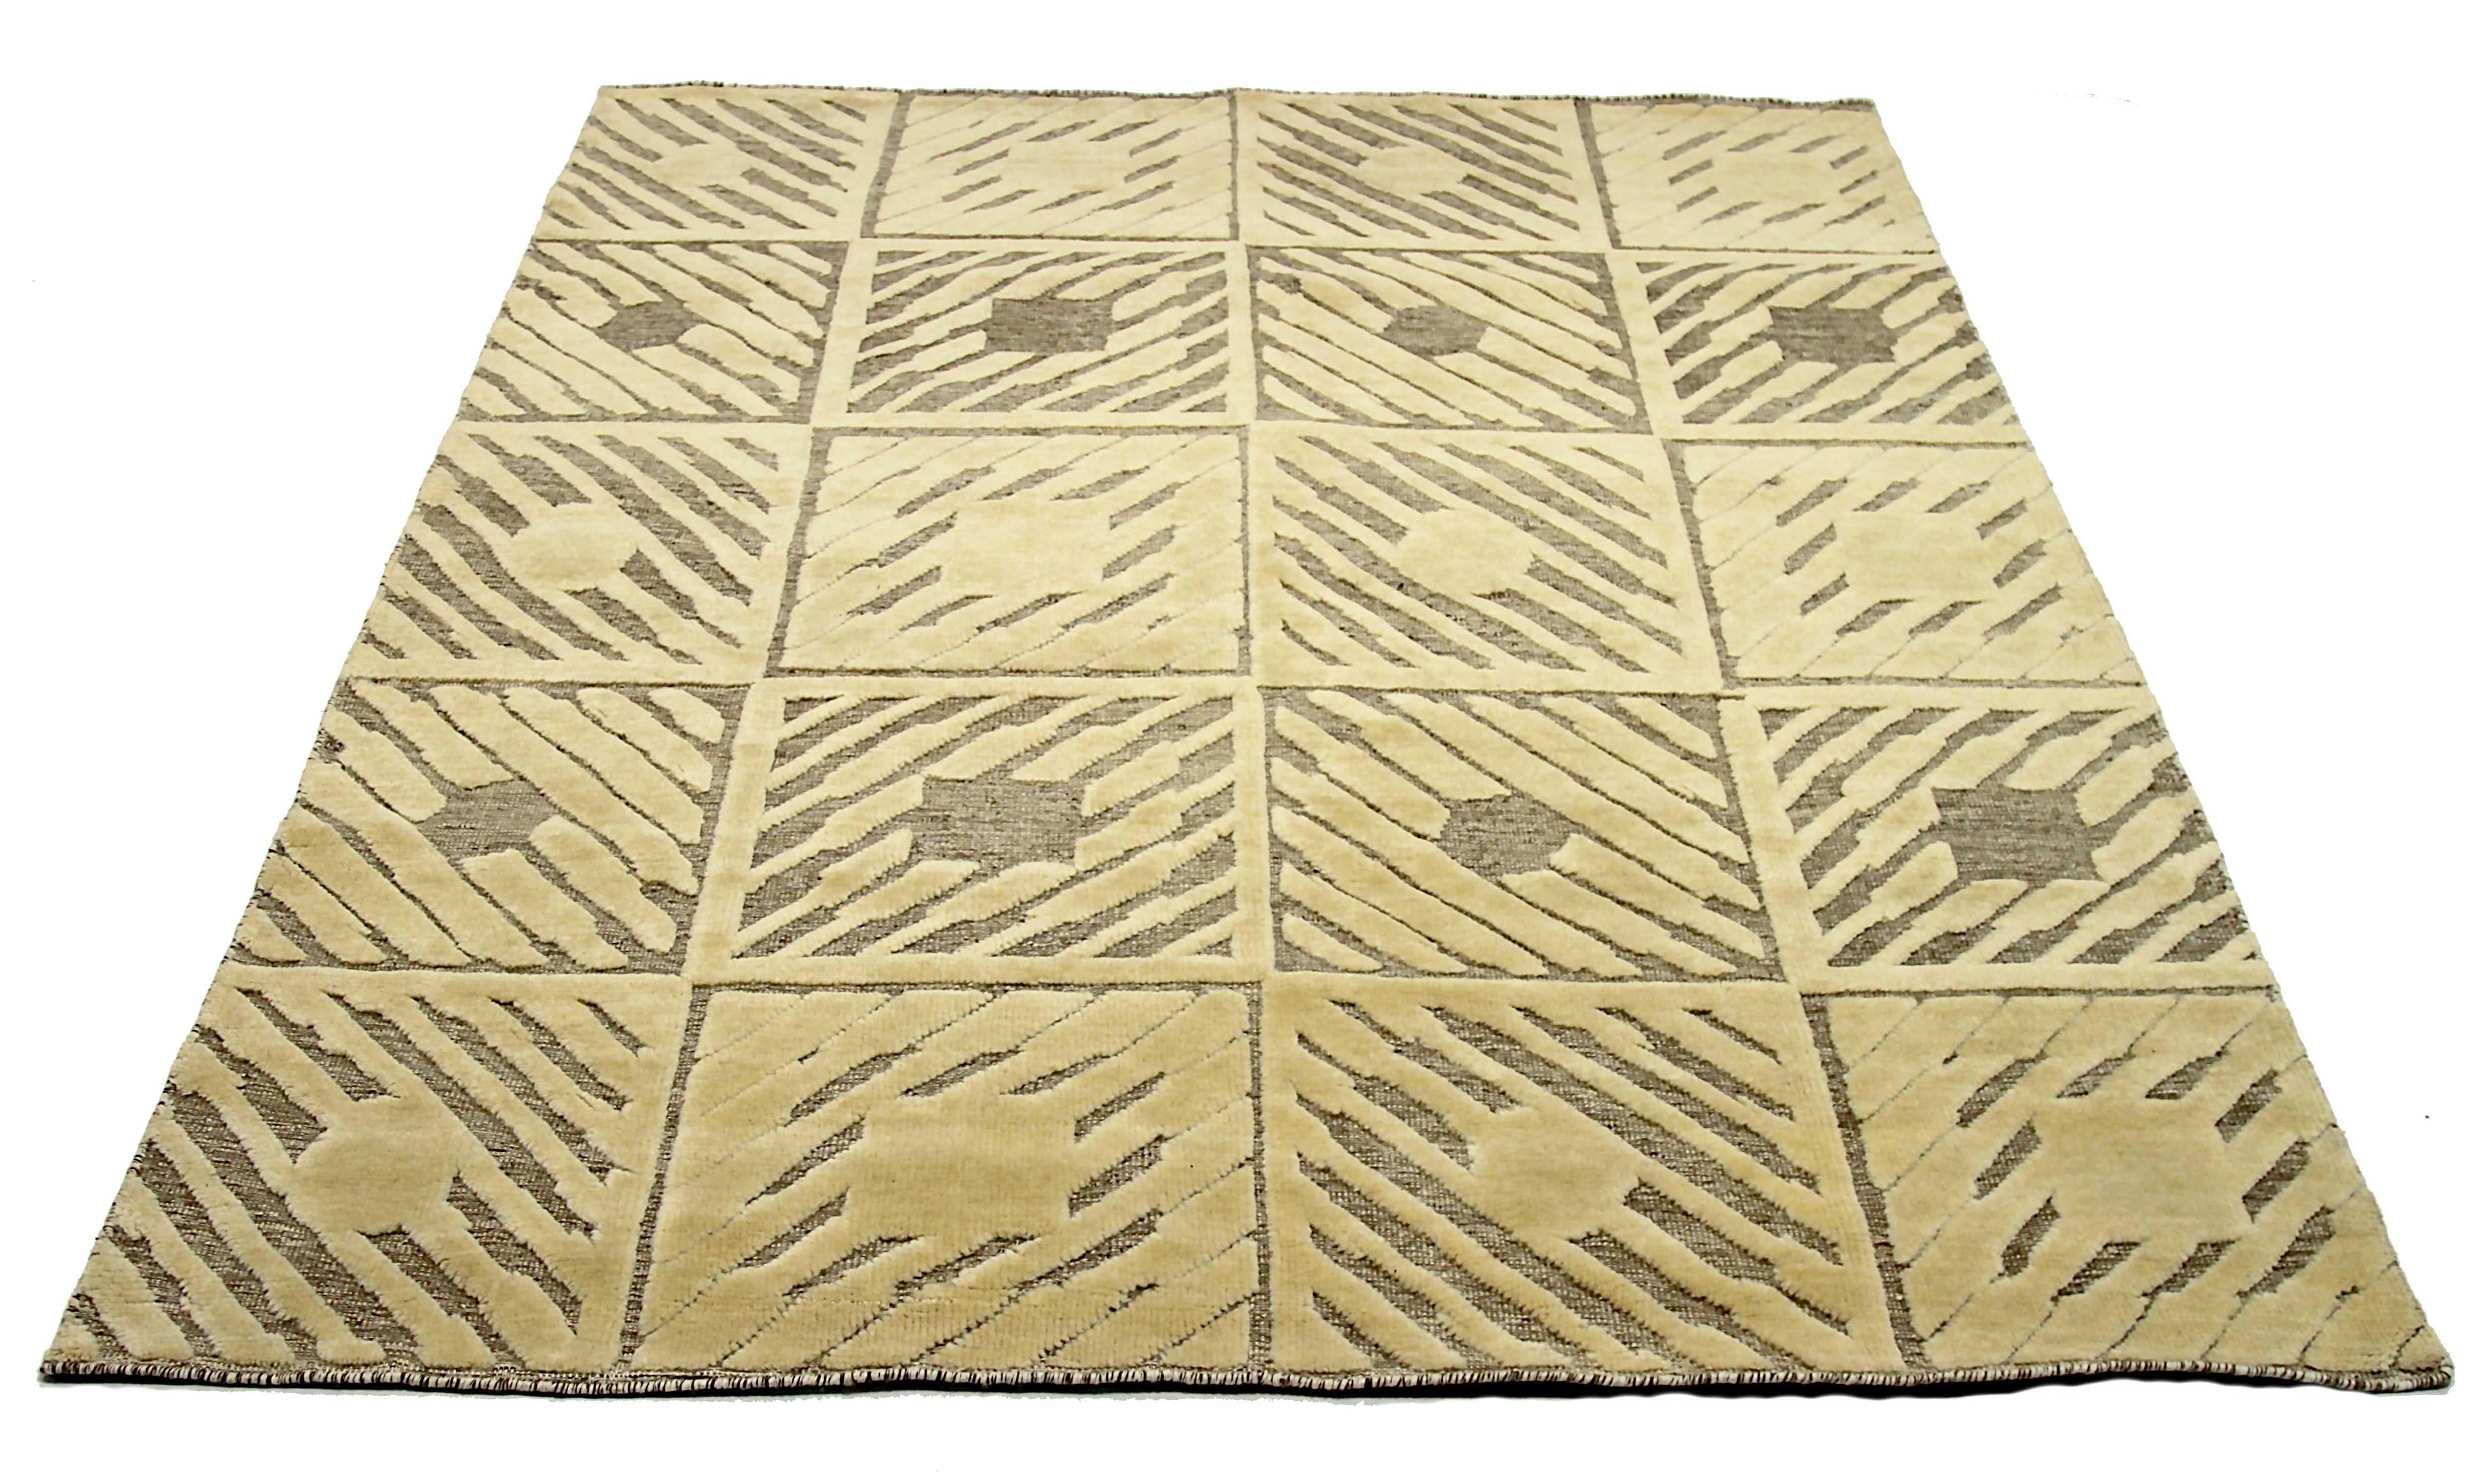 New area rug handwoven from the finest sheep’s wool. It’s colored with all-natural vegetable dyes that are safe for humans and pets. It has a nice 6’ x 8’ dimension that works perfectly in small to medium-sized rooms. 

Cameron Collection is our